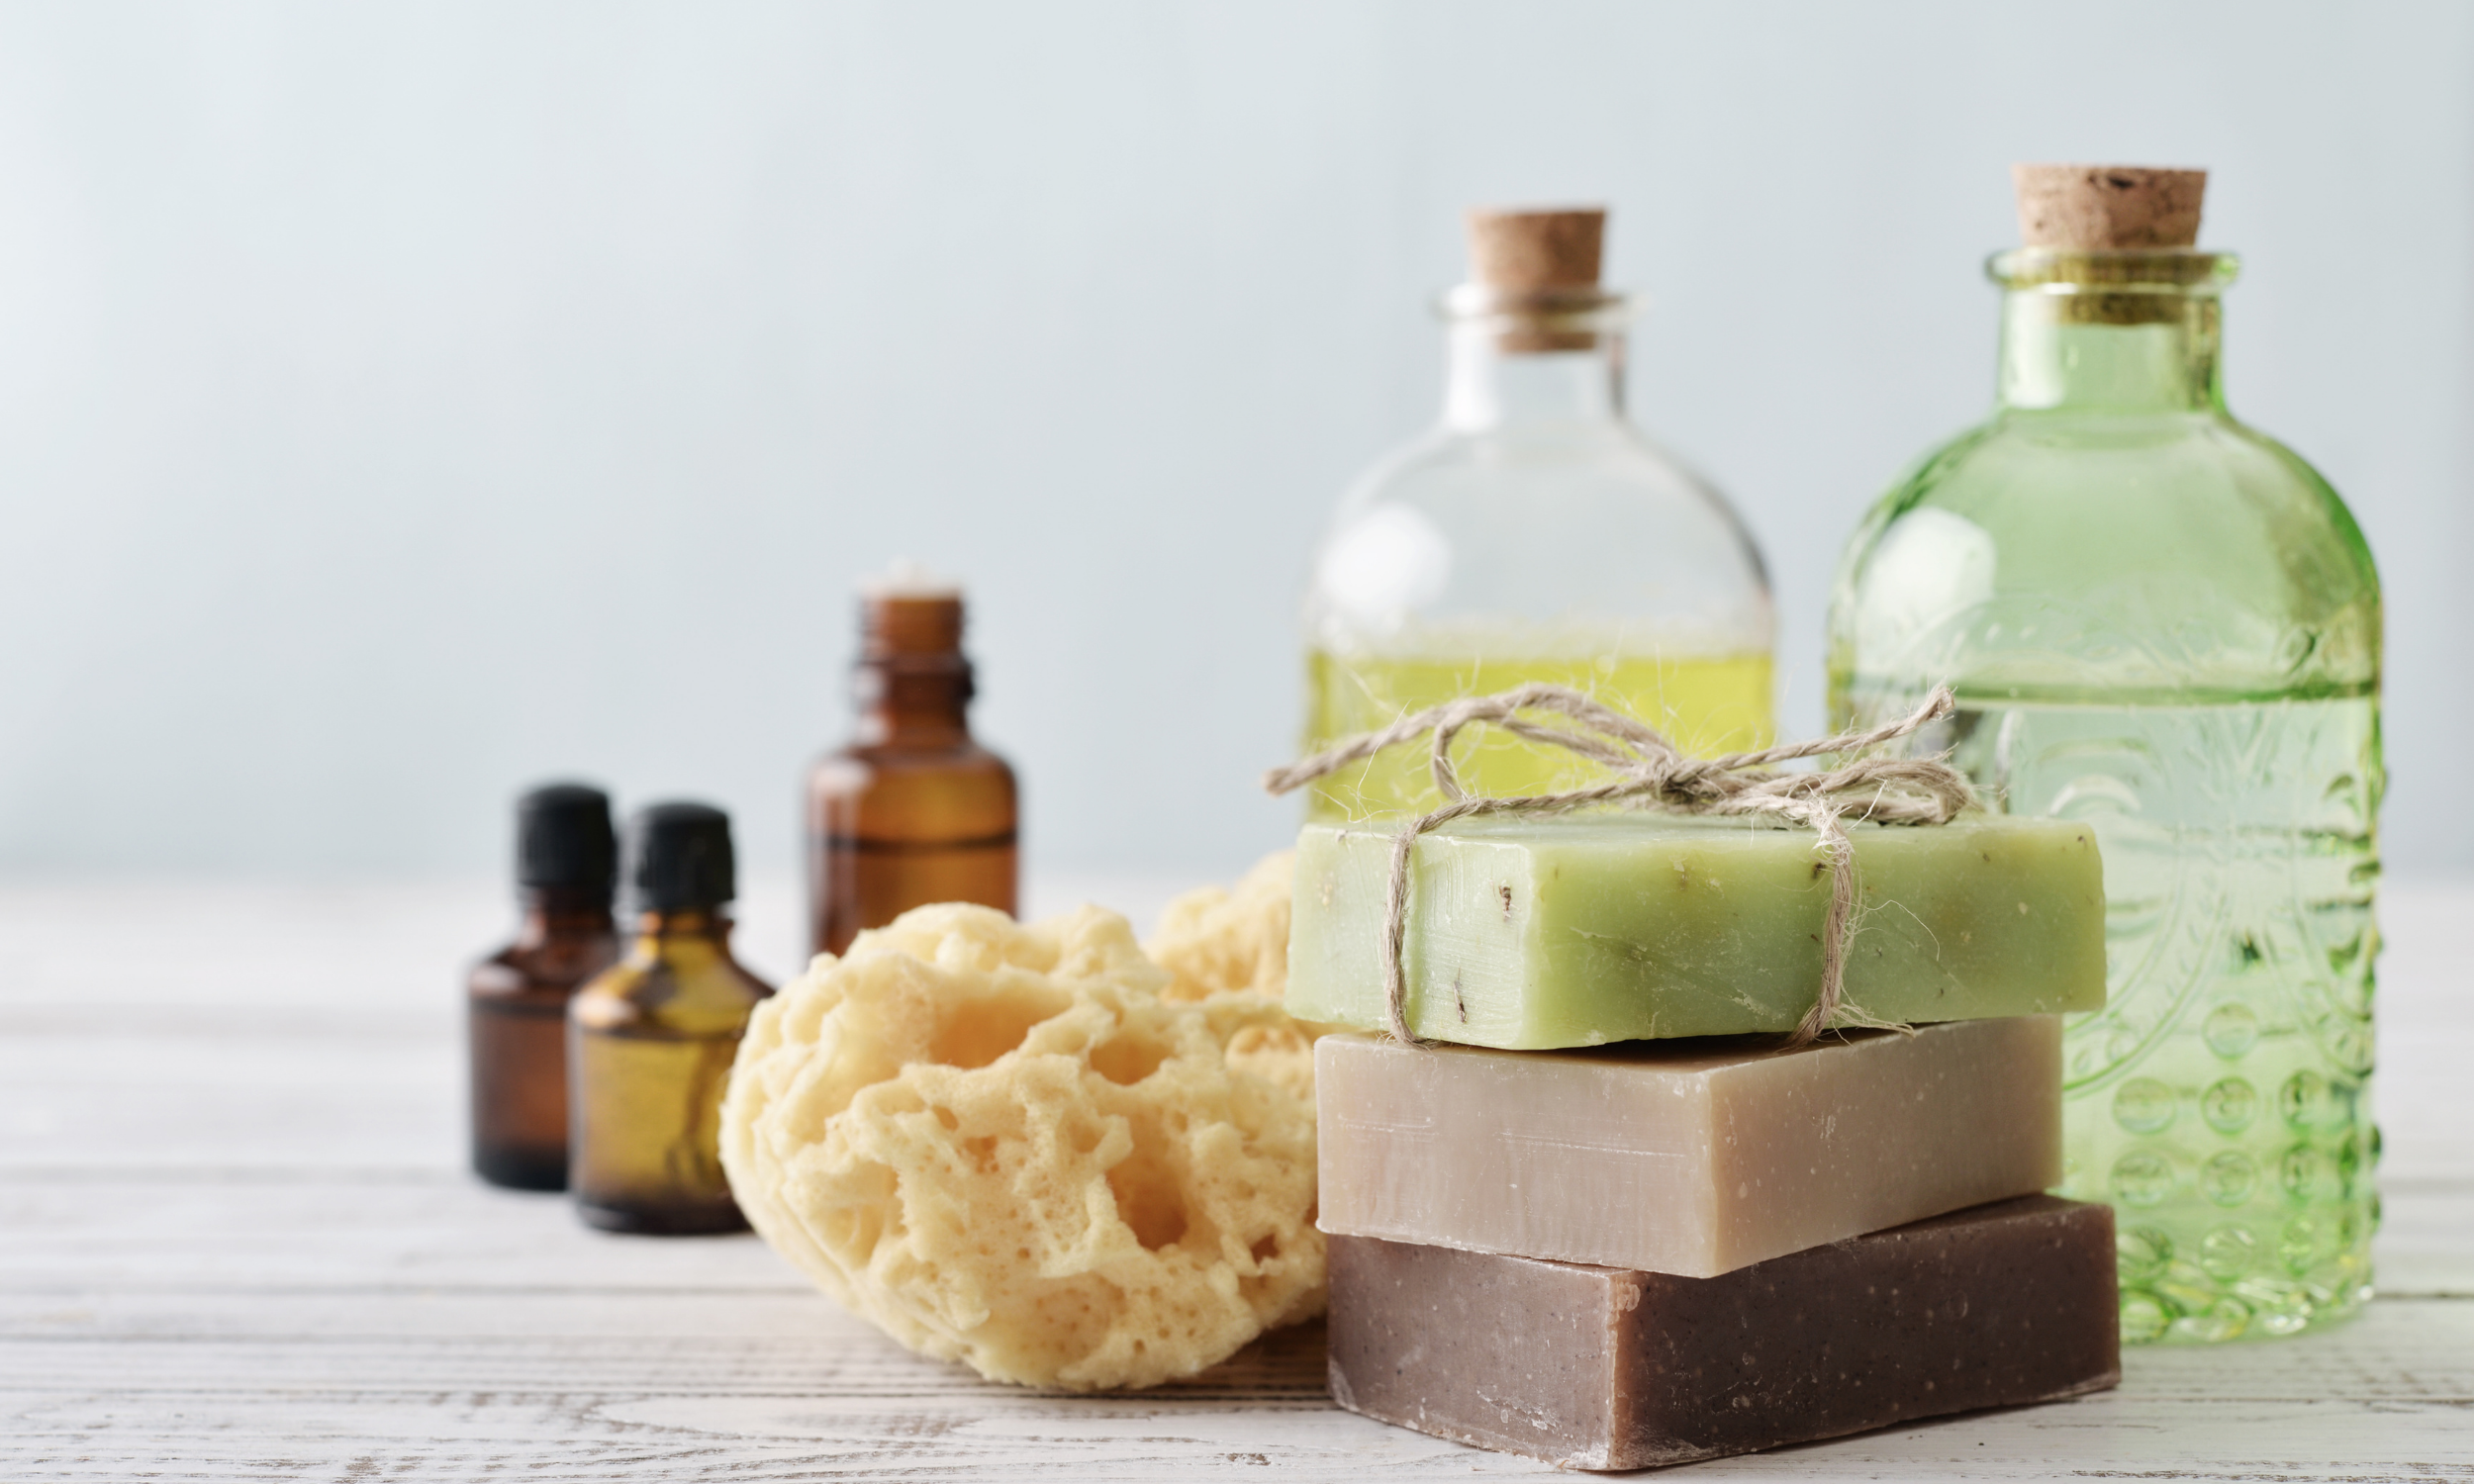 Homemade Beauty Products for Mom